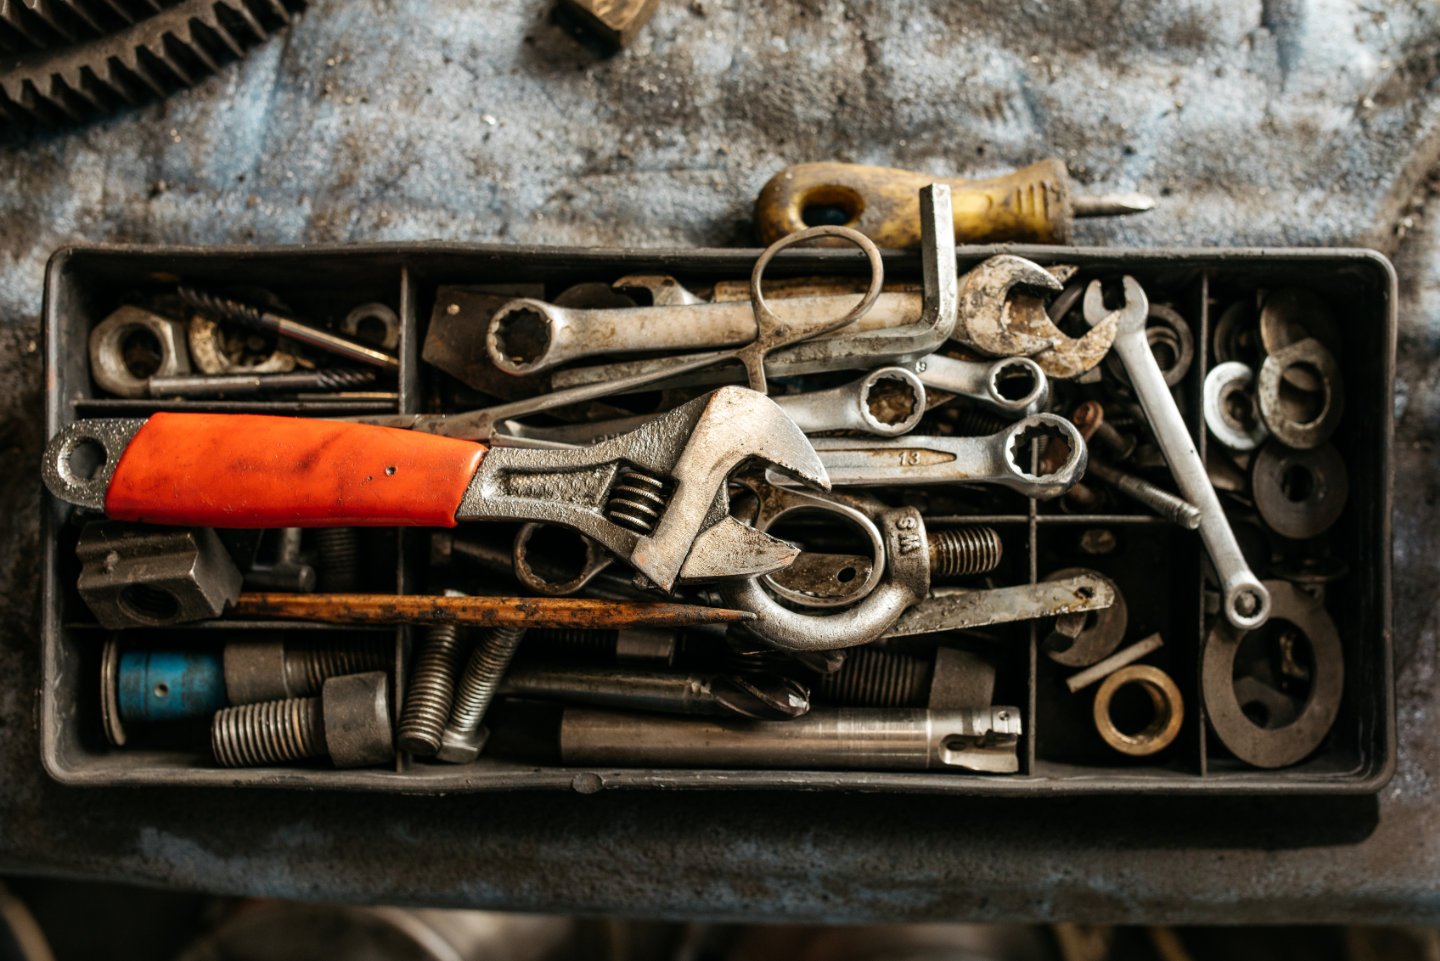 Wrench Organizer for Workshops to Day-to-Day Life